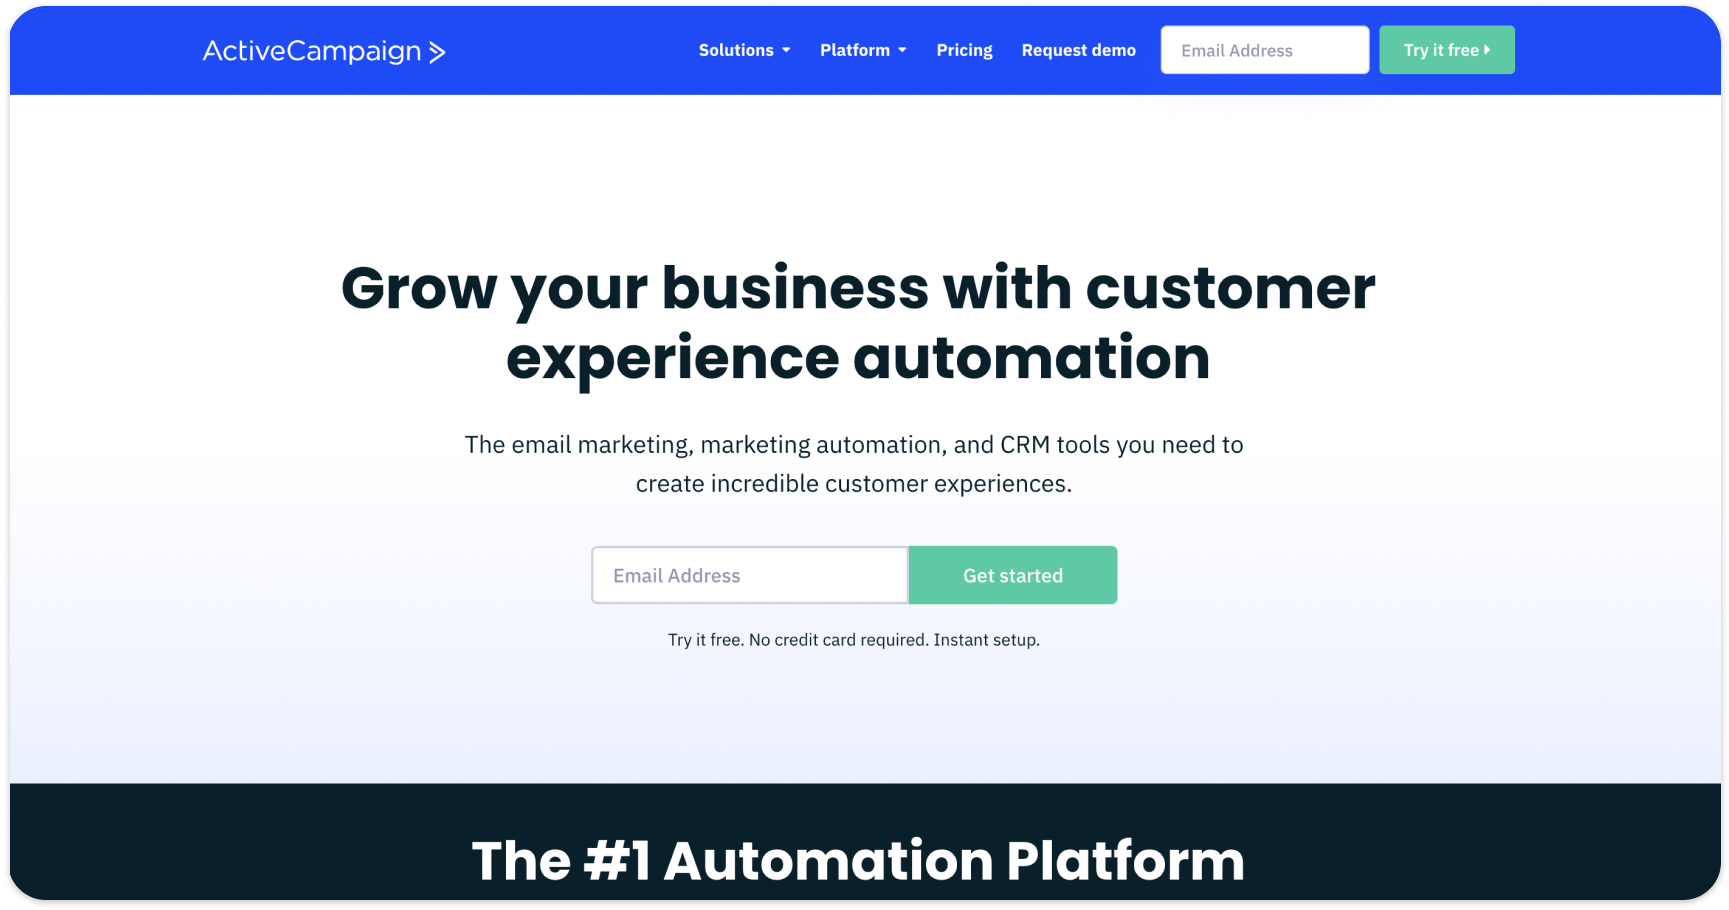 ActiveCampaign - marketing automation solution